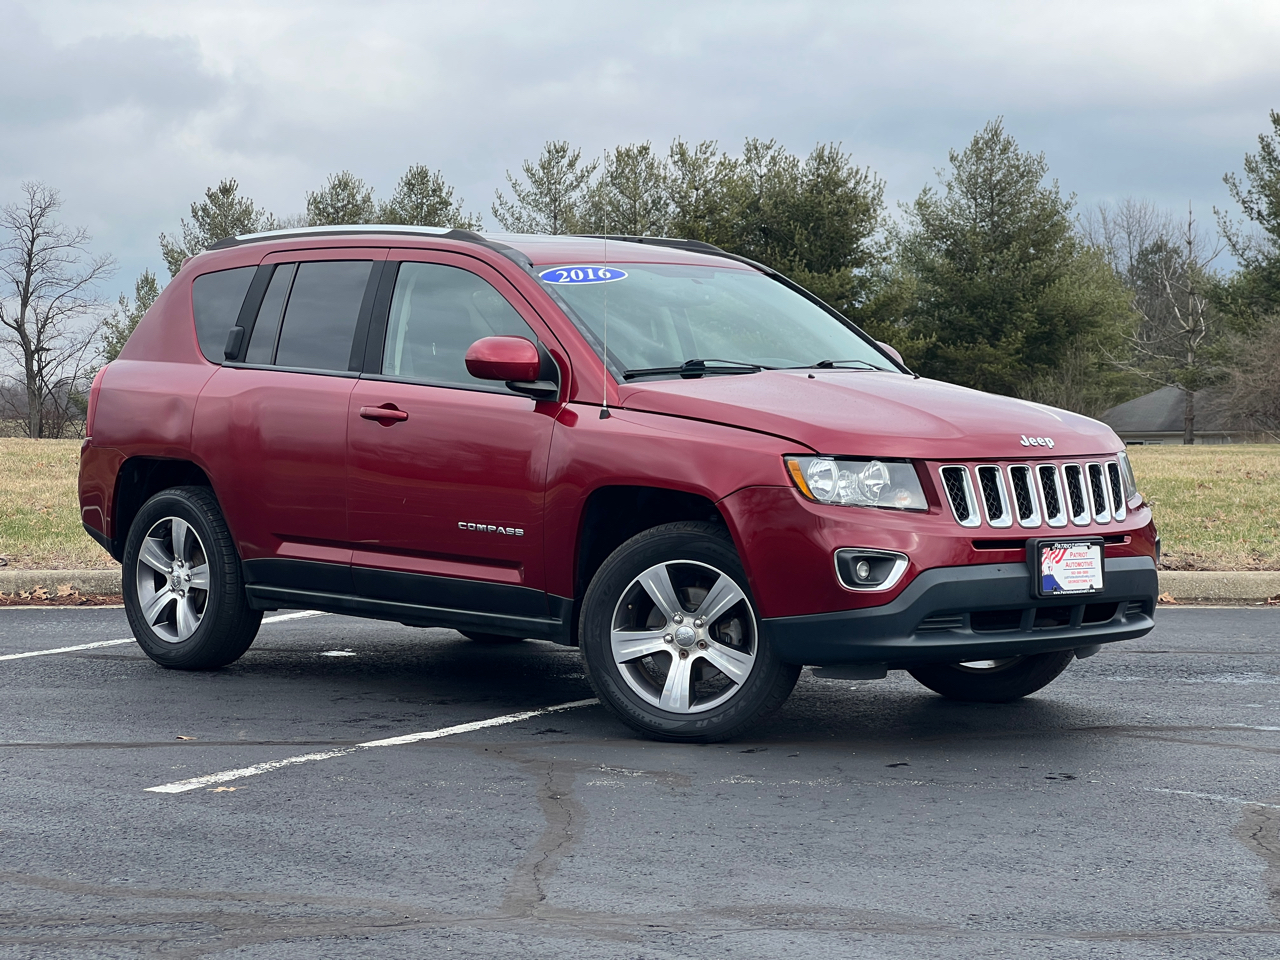 2016 Jeep Compass FWD 4dr High Altitude Edition